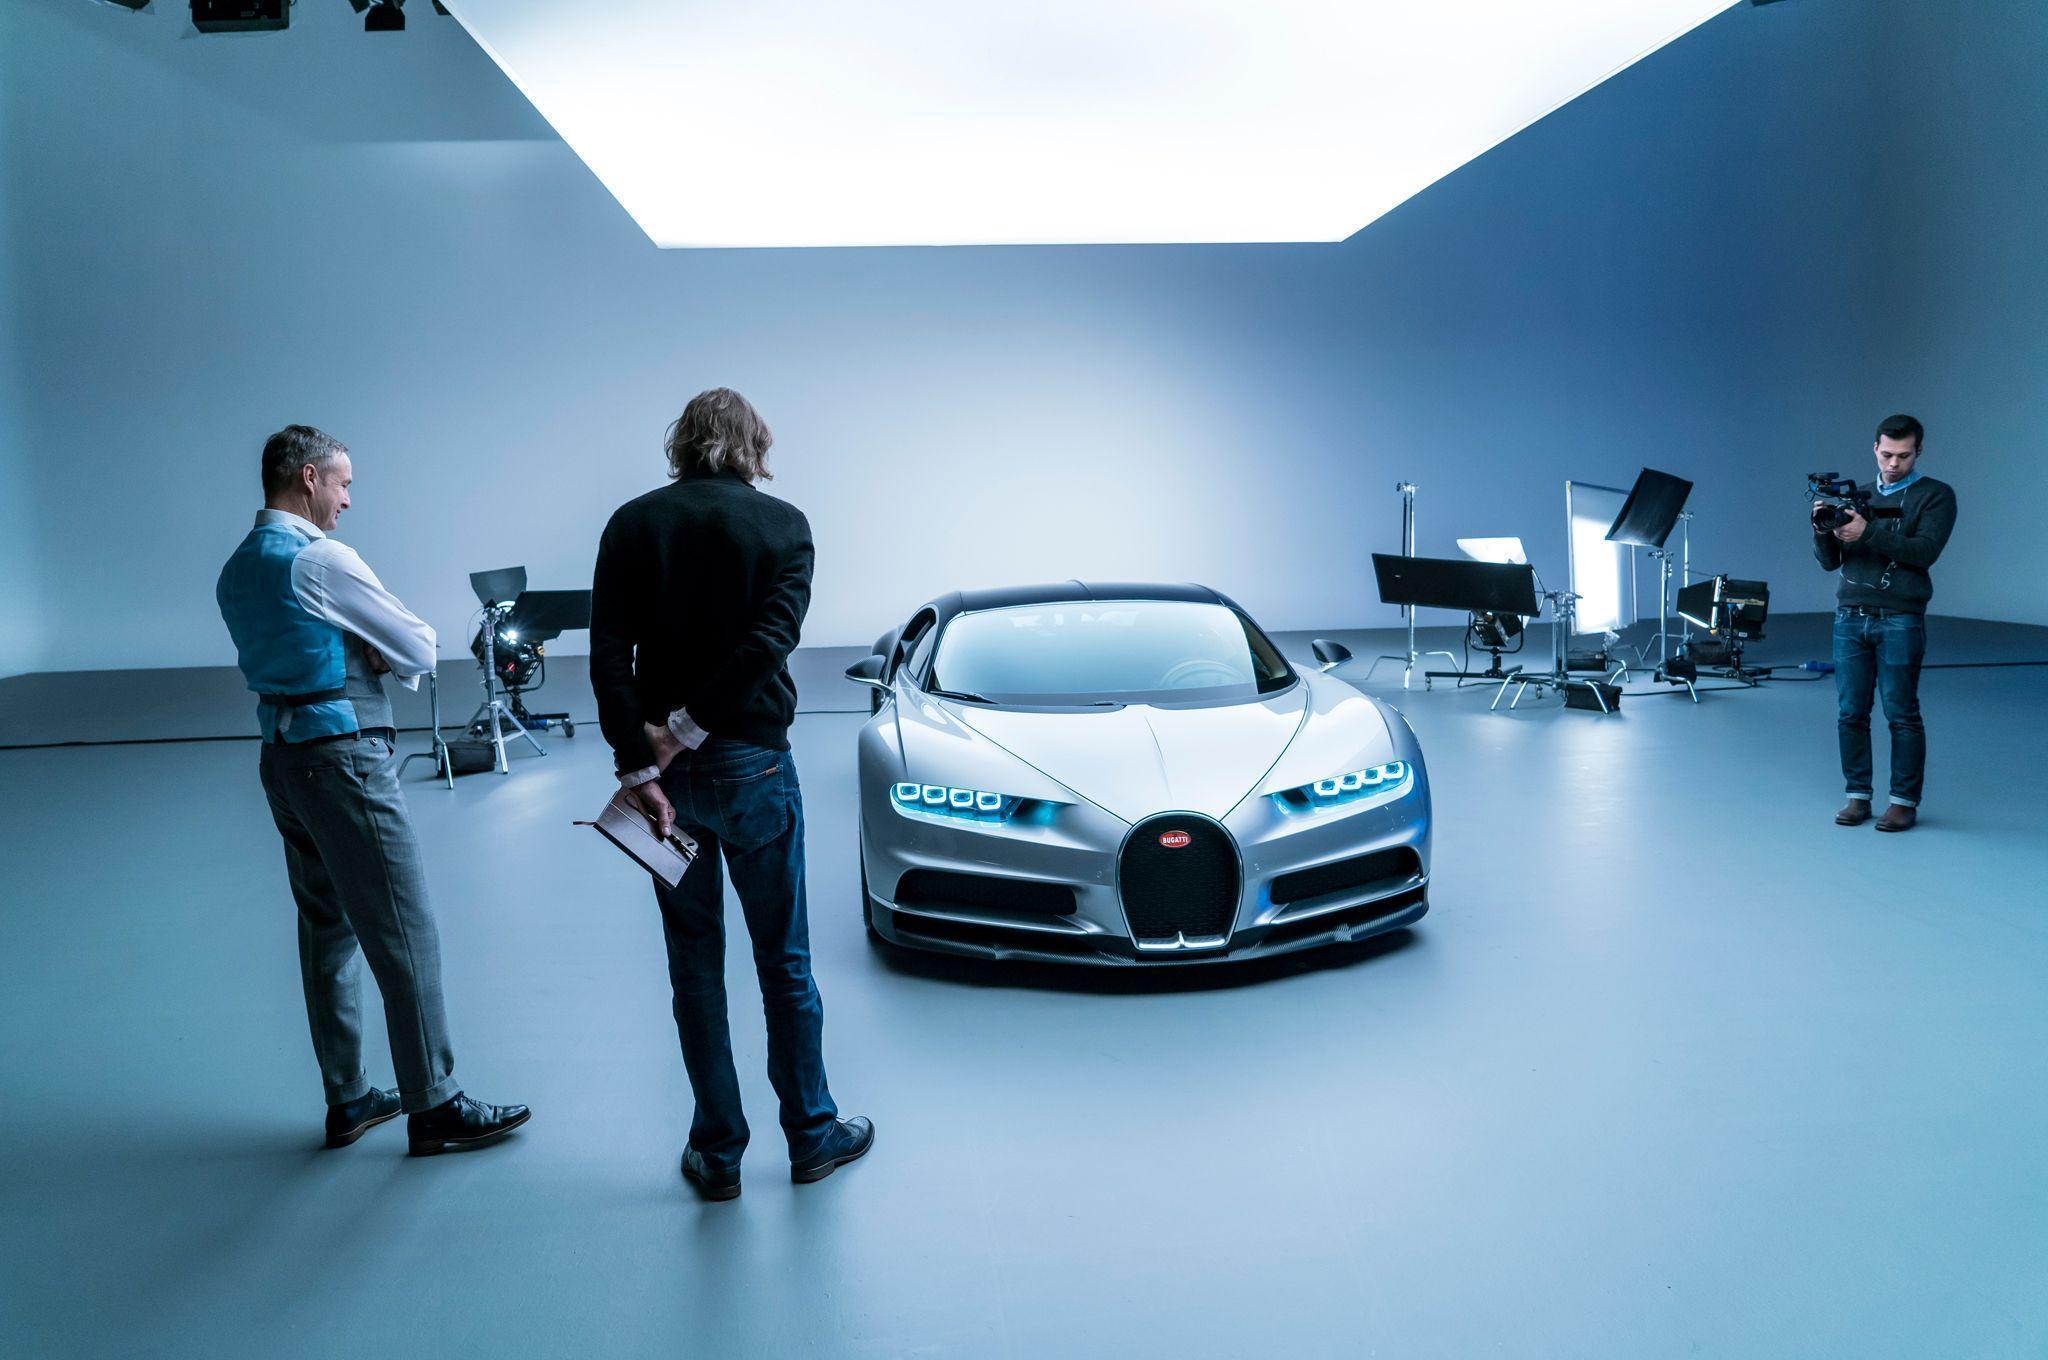 Bugatti Chiron First Look Review: Resetting the Benchmark